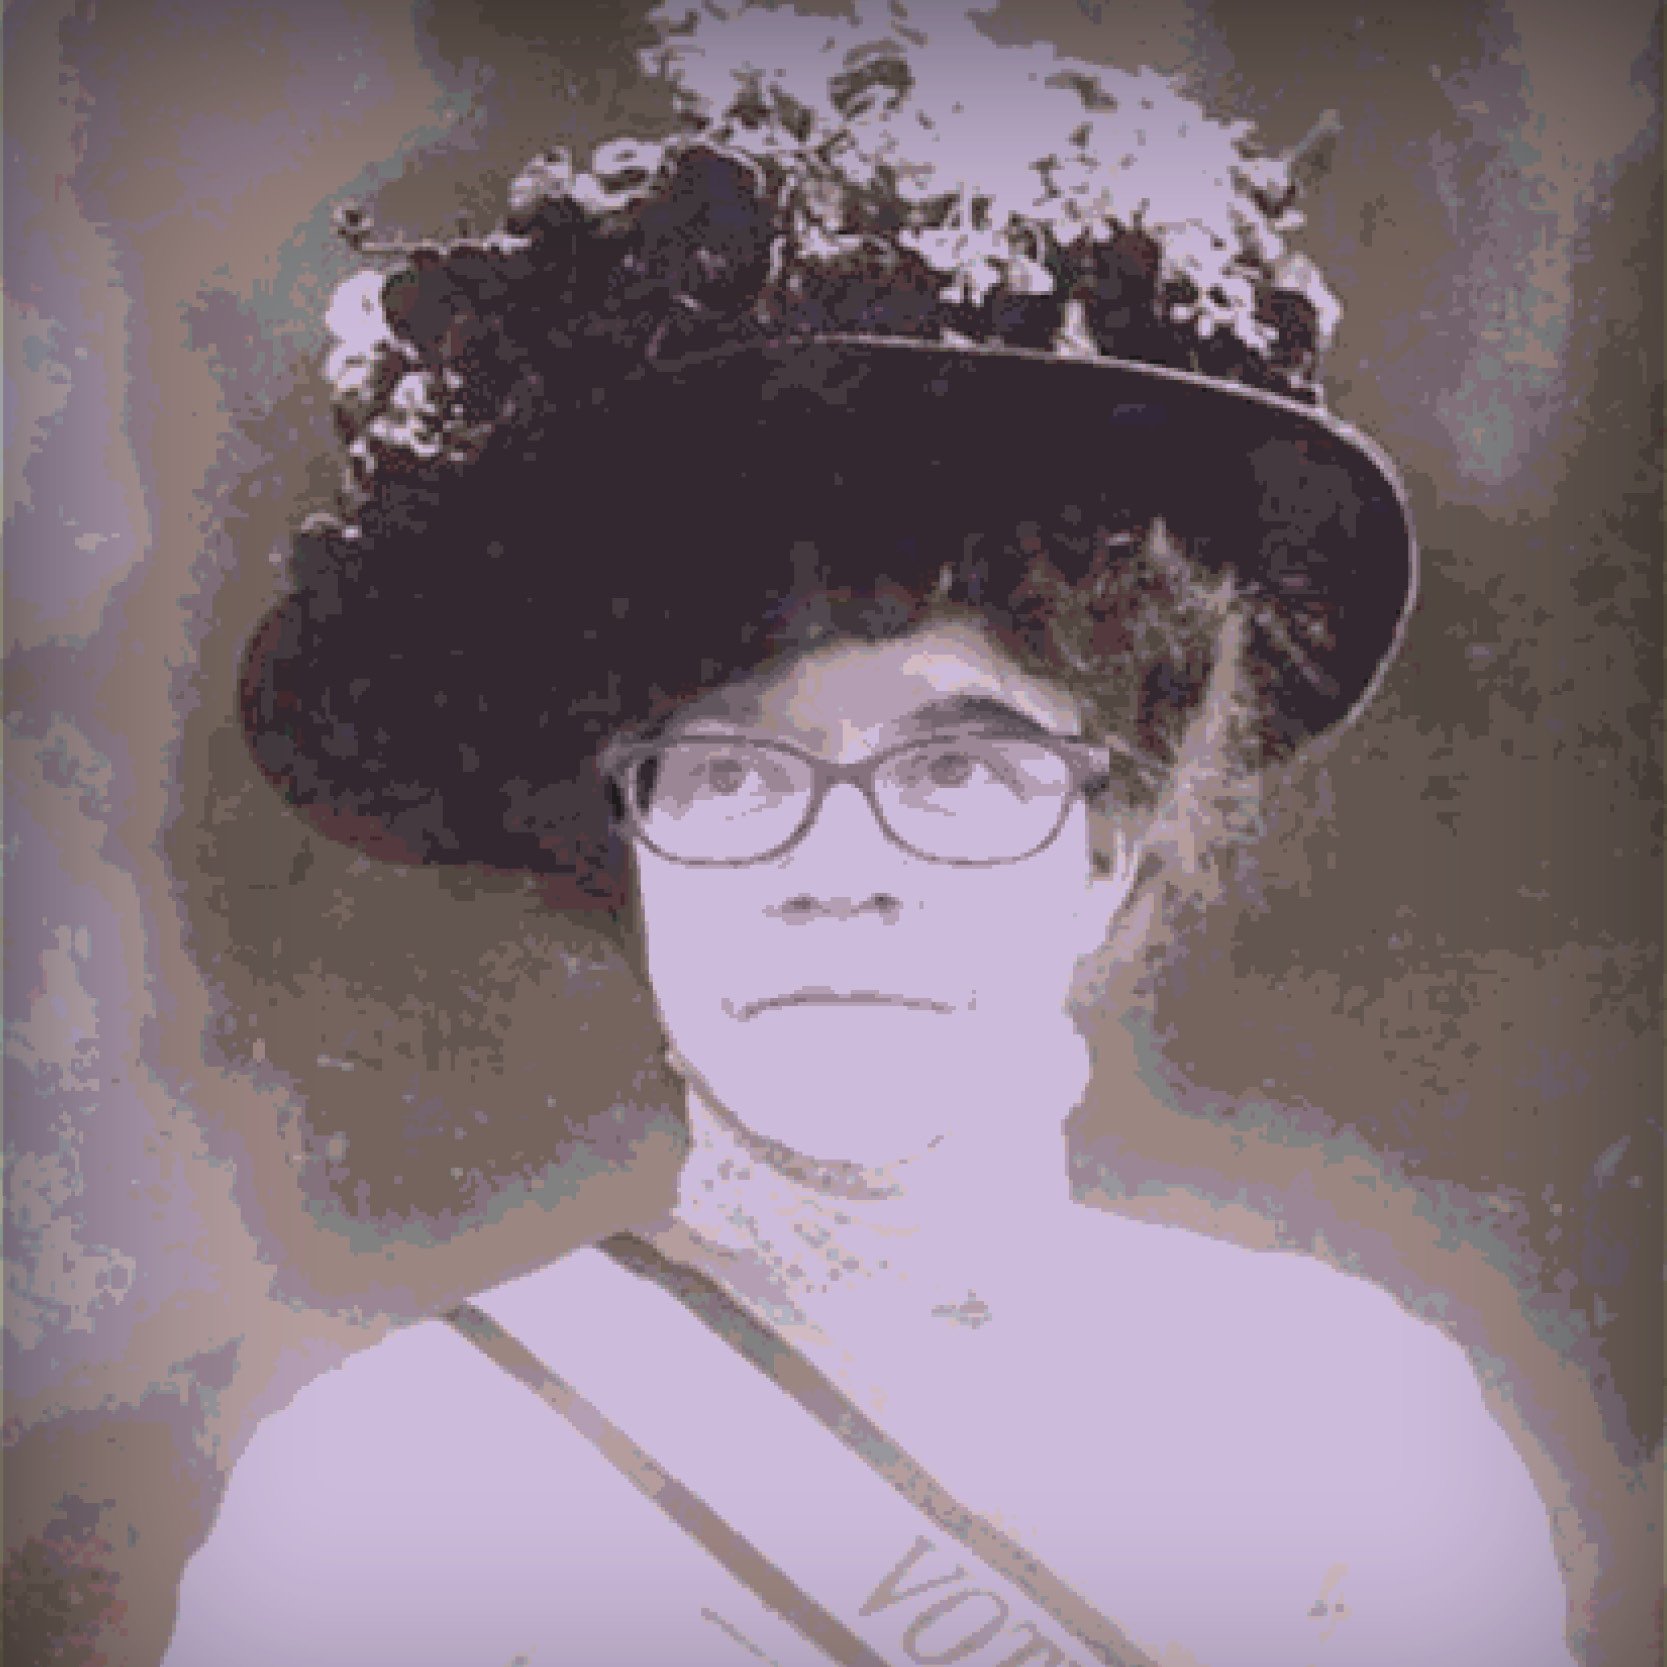 It's August 1919 and The Bessie Carruthers Study Club is convening. Join Miss Carruthers and her special guest at the PEI Fringe Festival, August 1-5, 2019.